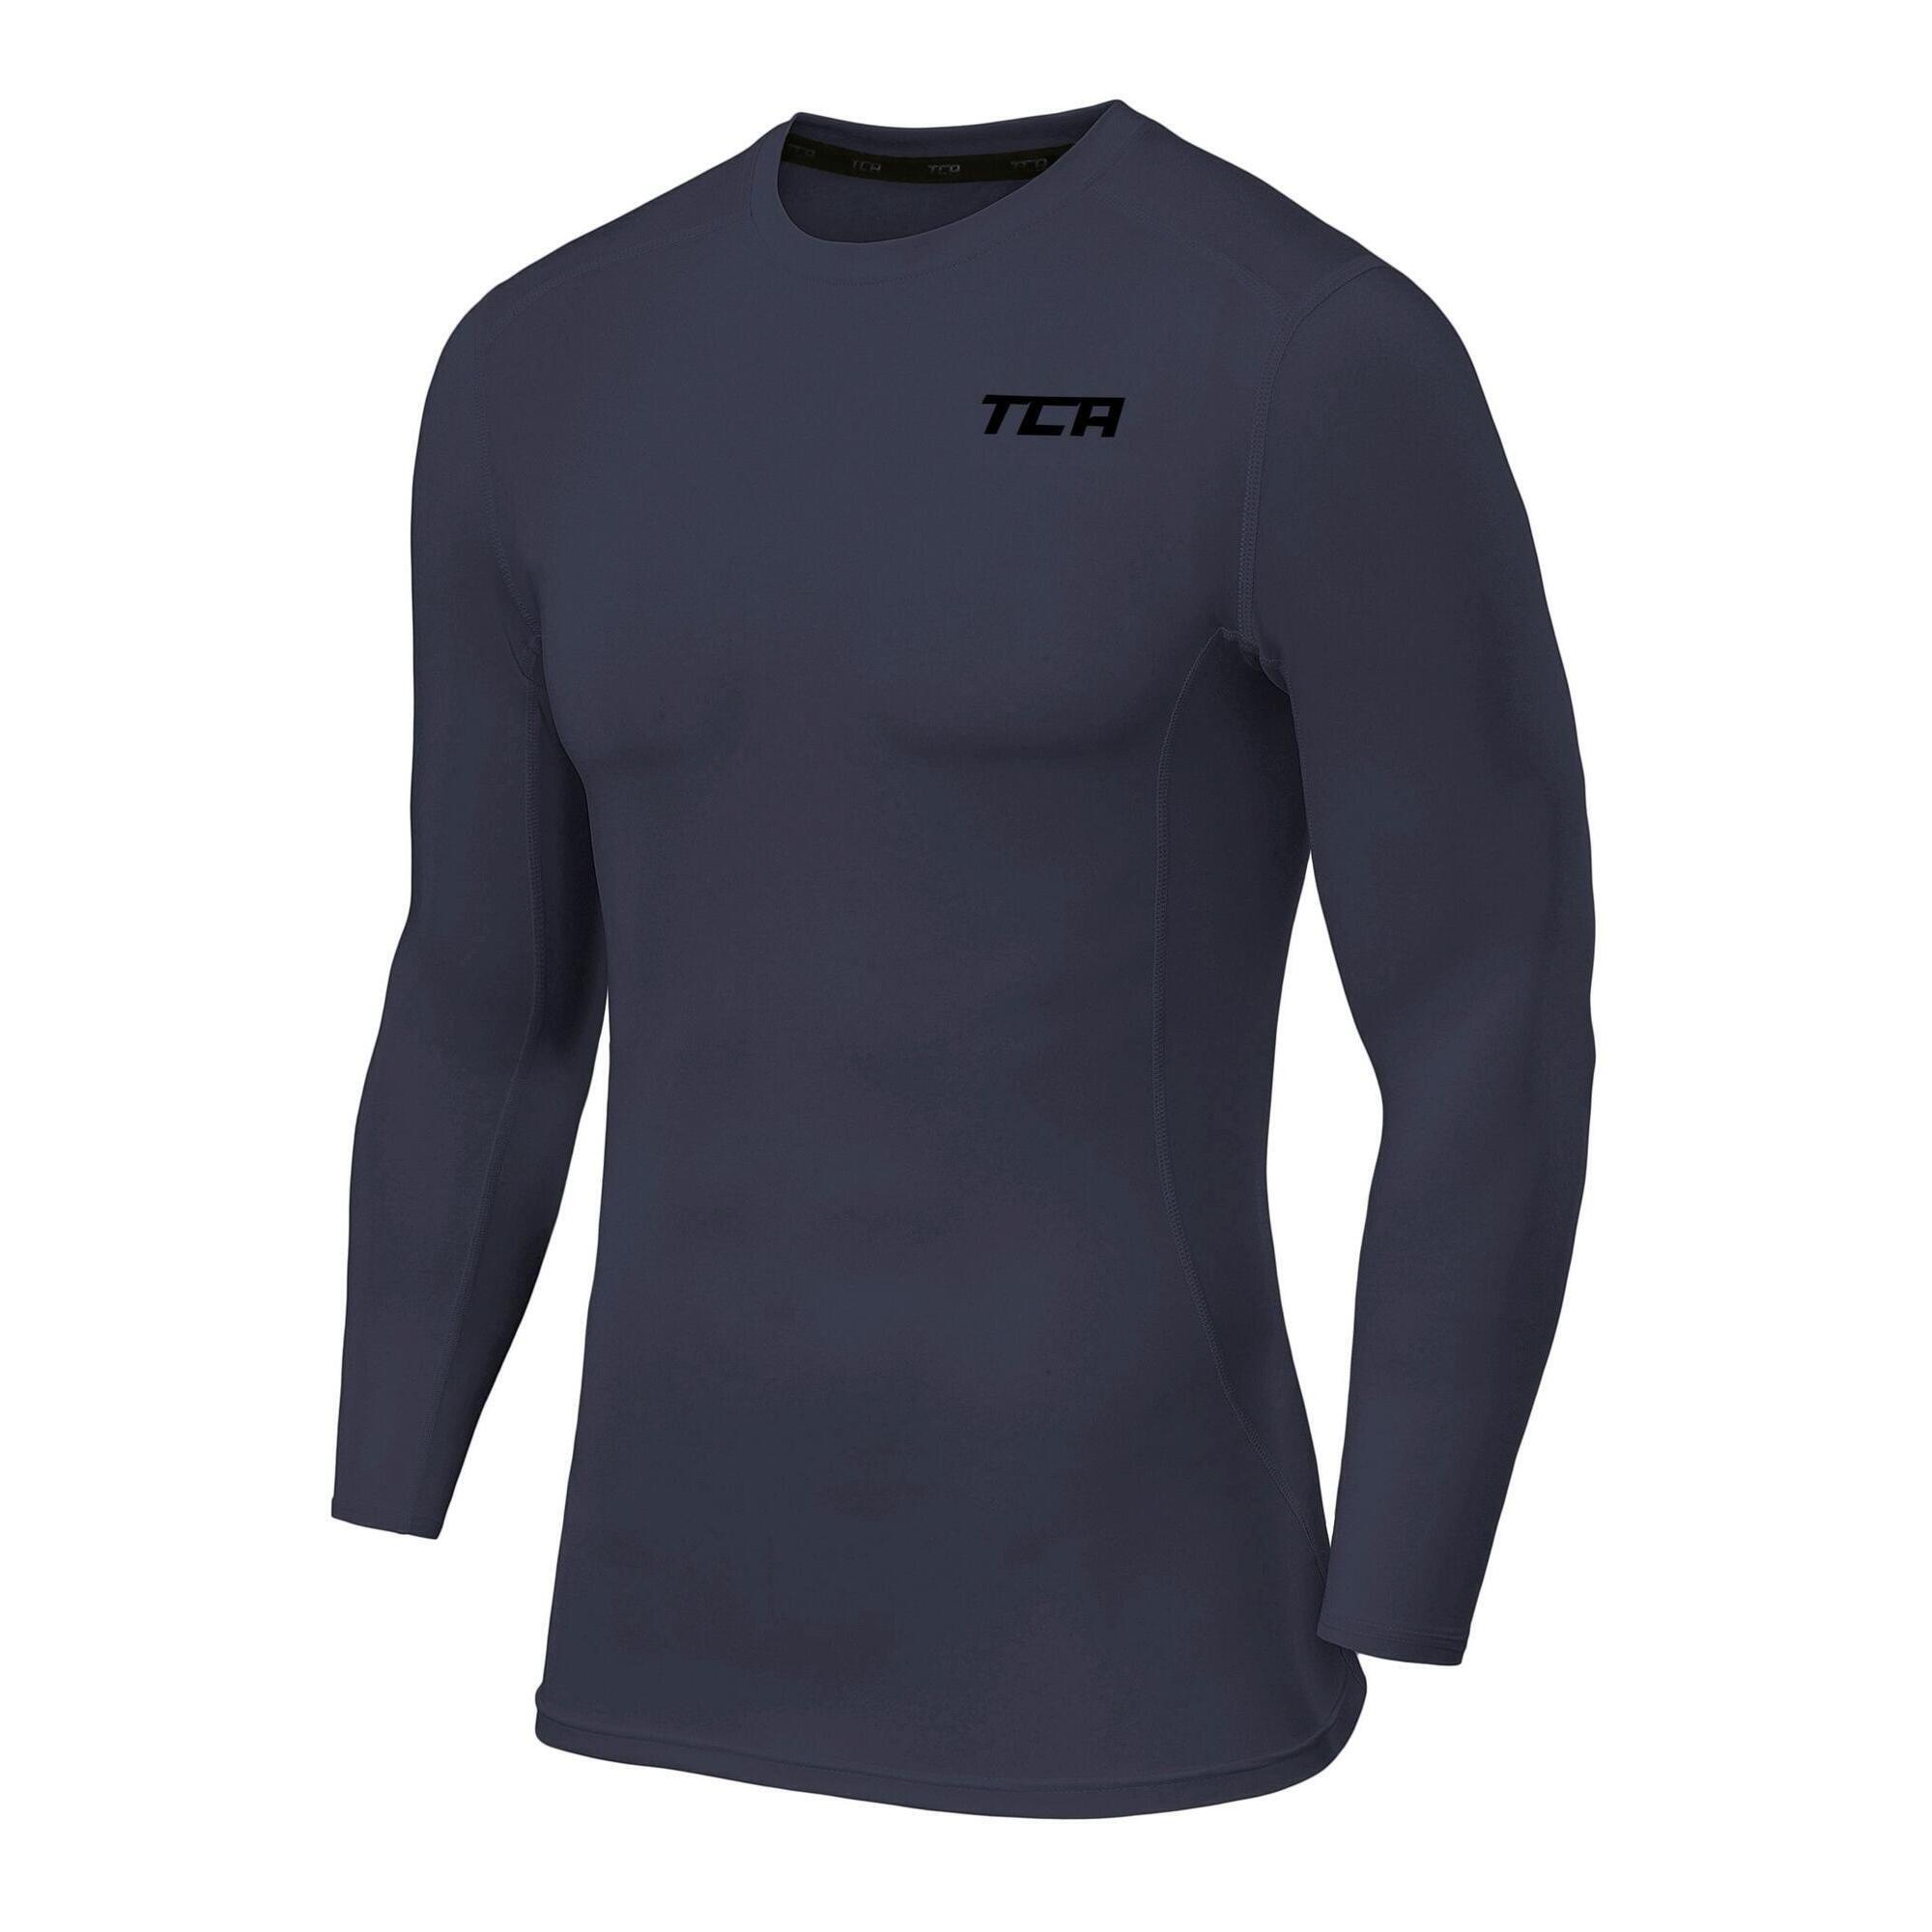 Men's Power Base Layer Compression Long Sleeve Top - Graphite 1/5